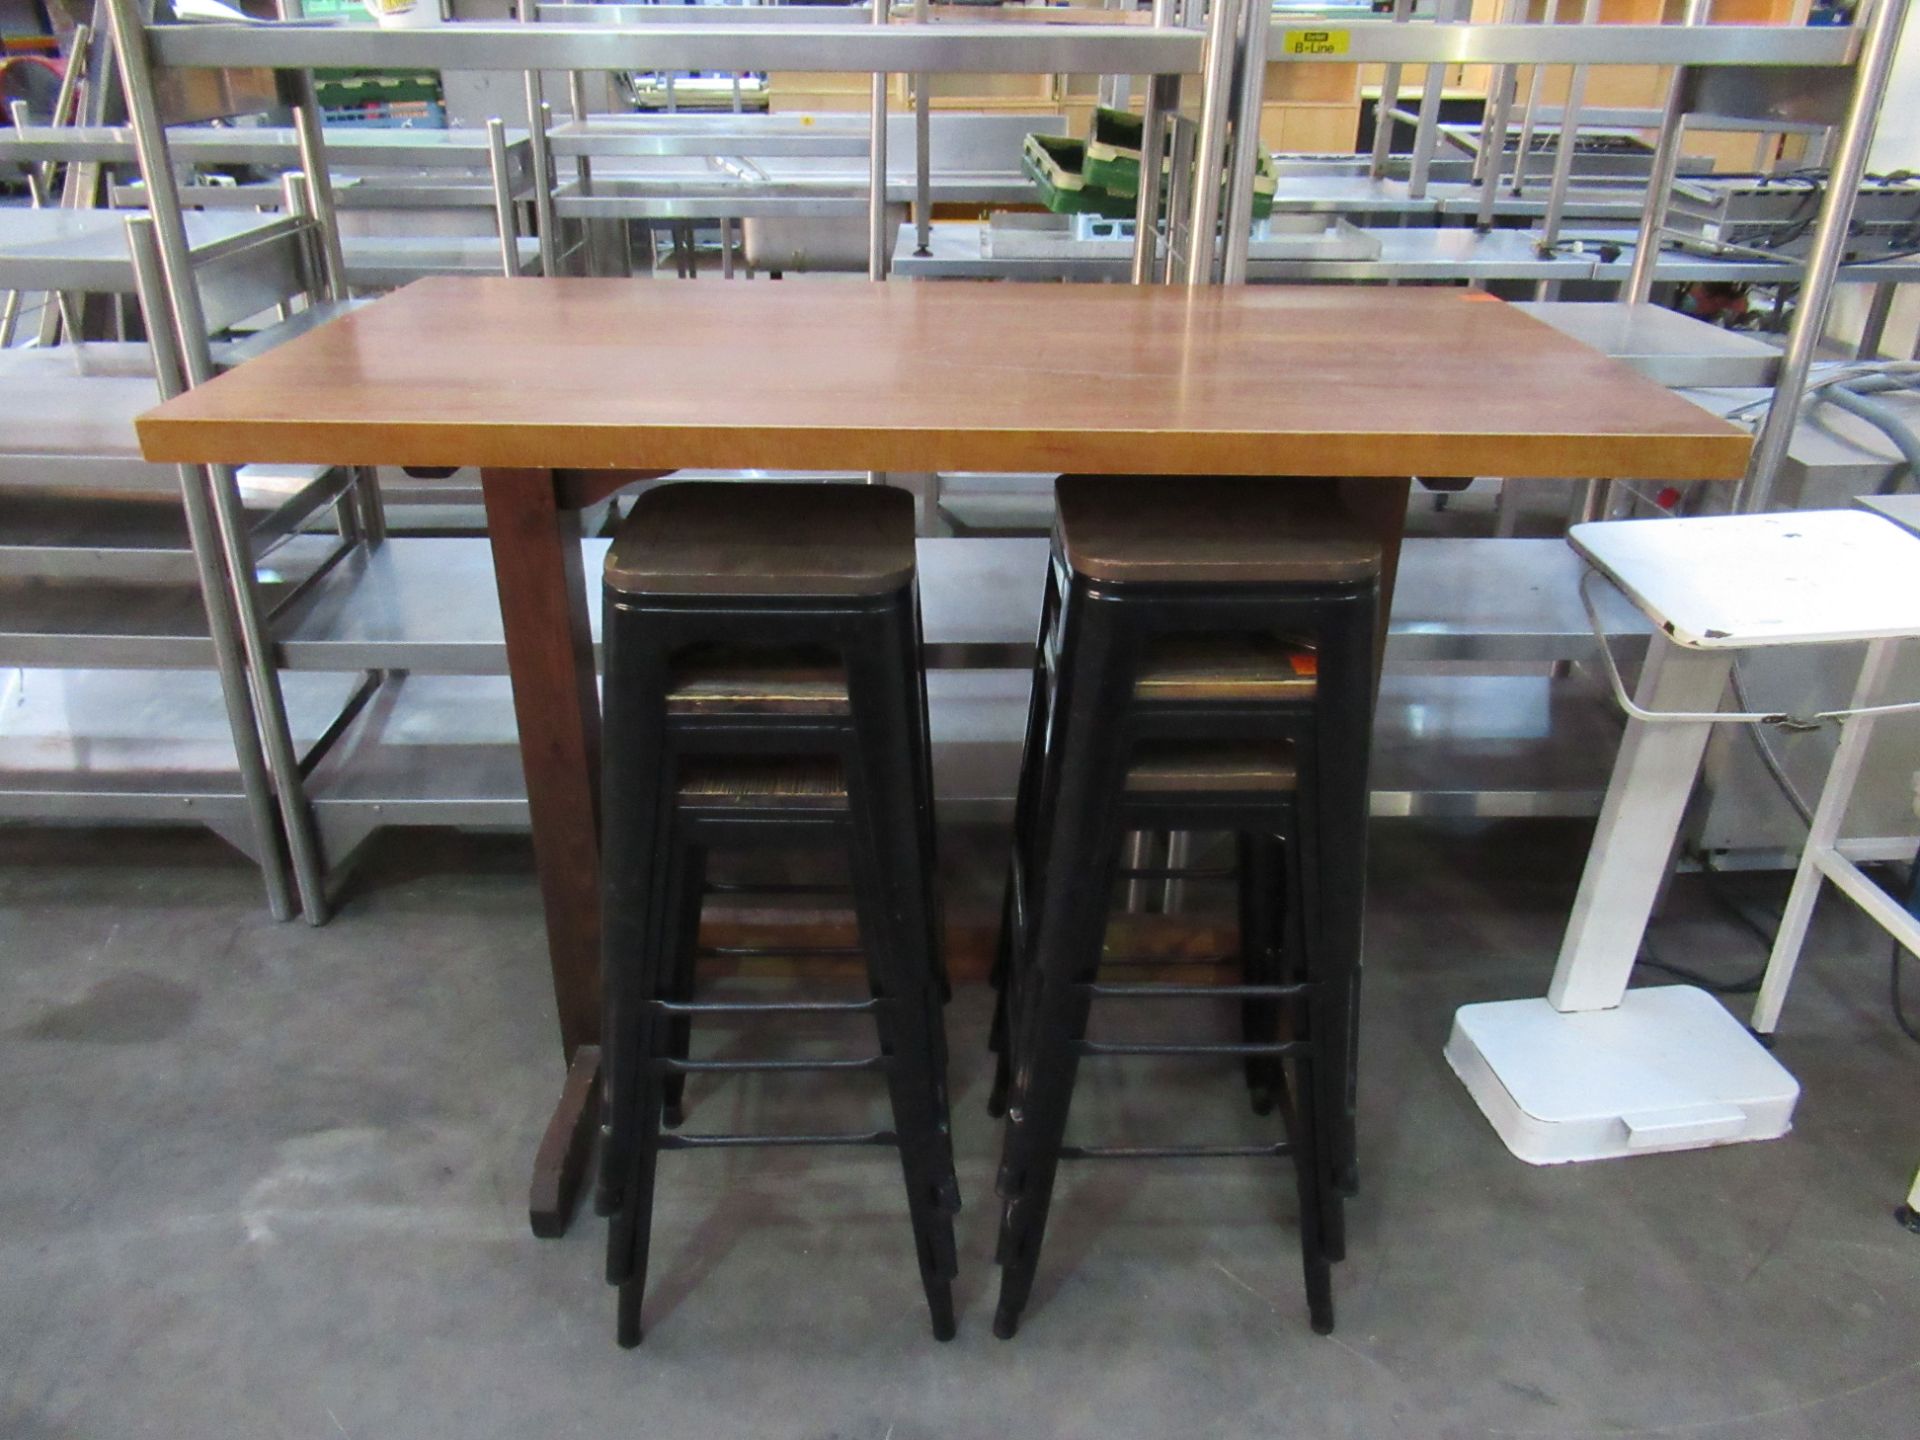 Rectangular Bar Table with 6x Stacking Stools (800 x 1500 x 1120mm)